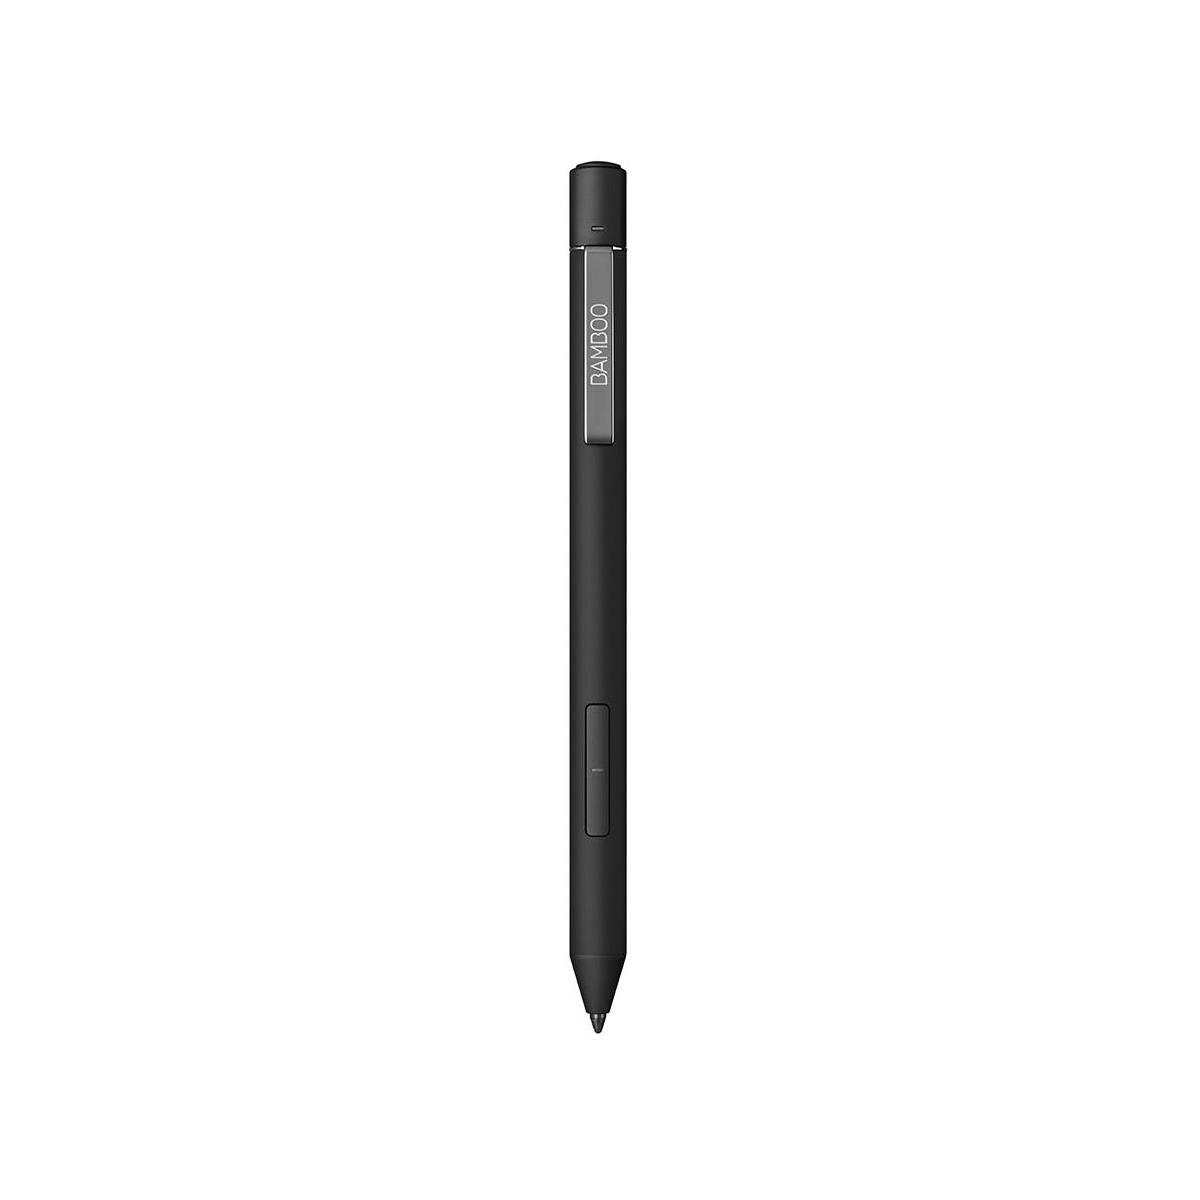 Image of Wacom Bamboo Ink Plus Smart Stylus for Windows Ink Enabled 2-in-1 Devices